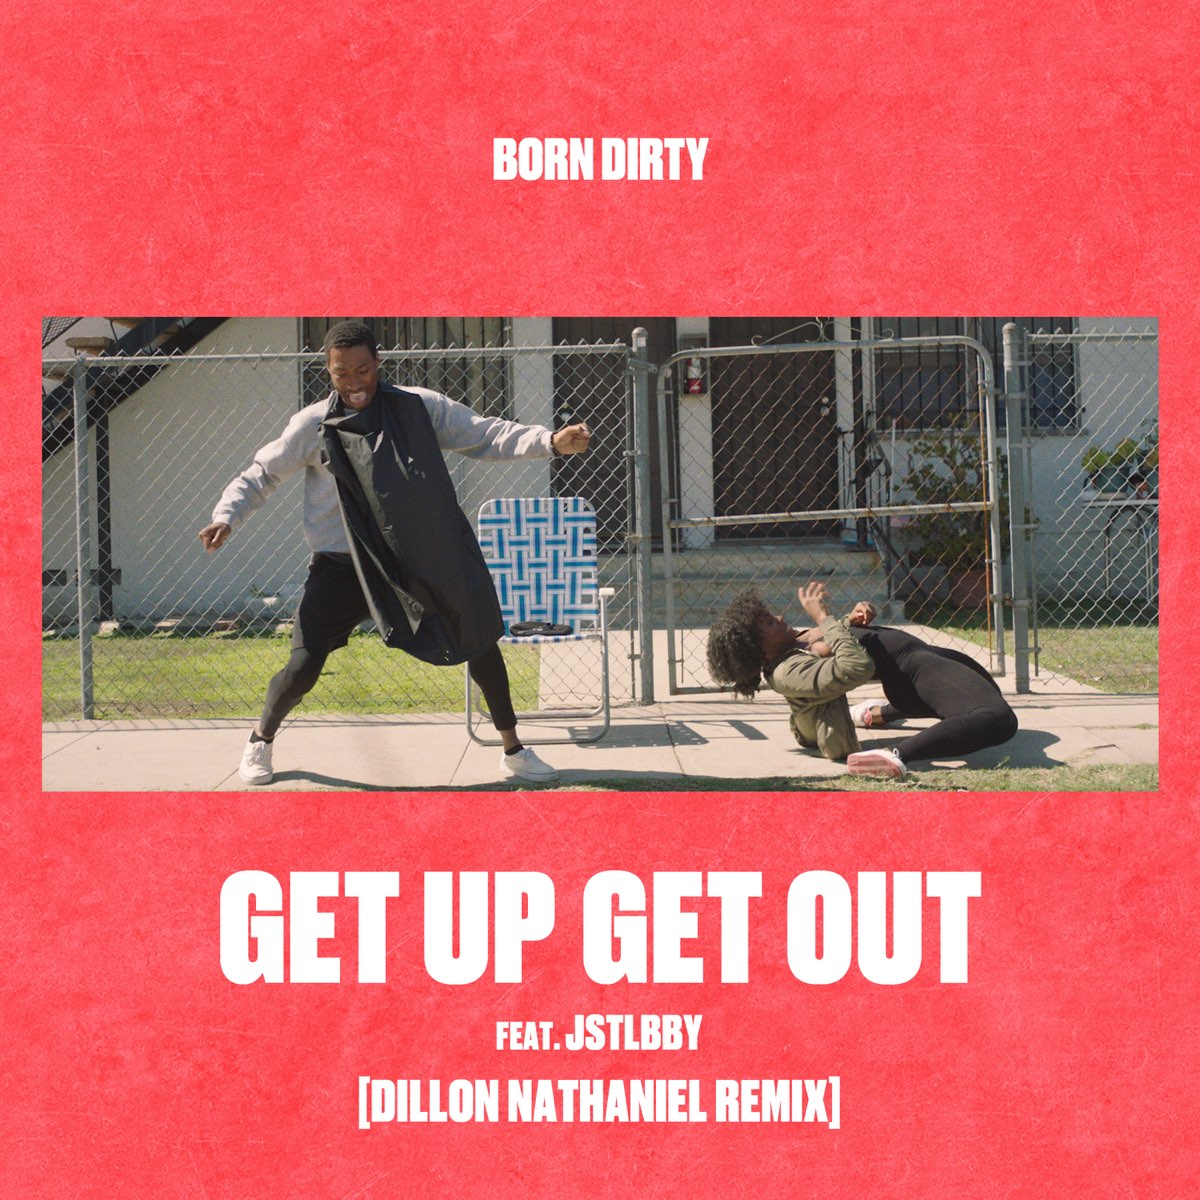 Get out get up. Born Dirty - get up get out (feat. Jstlbby). Get in get out журнал. Dirt-born. M s i get it up